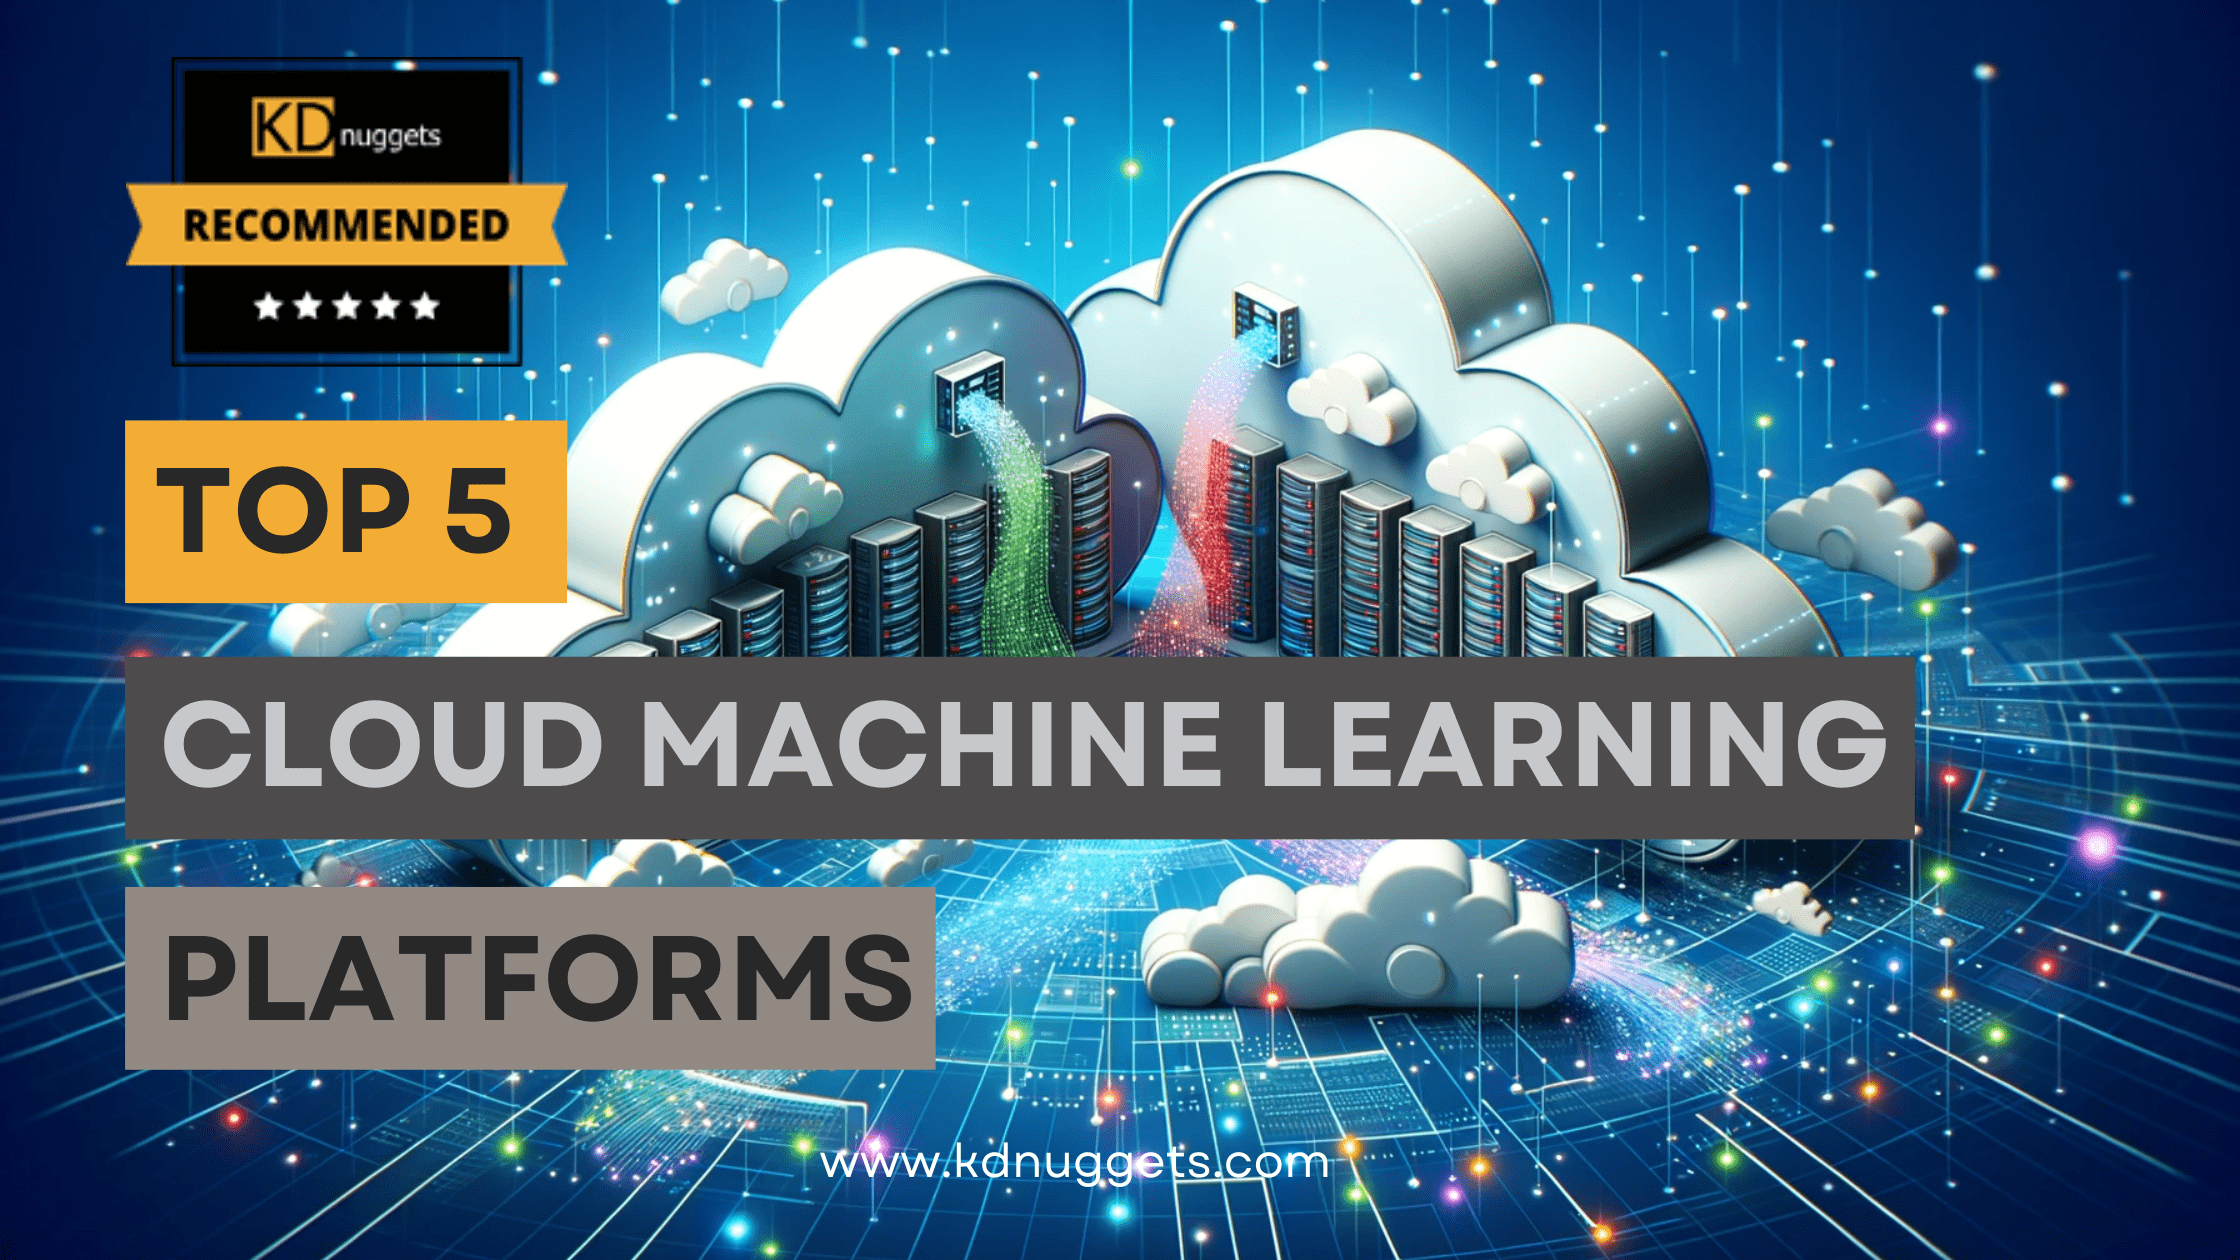 The Top 5 Cloud Machine Learning Platforms